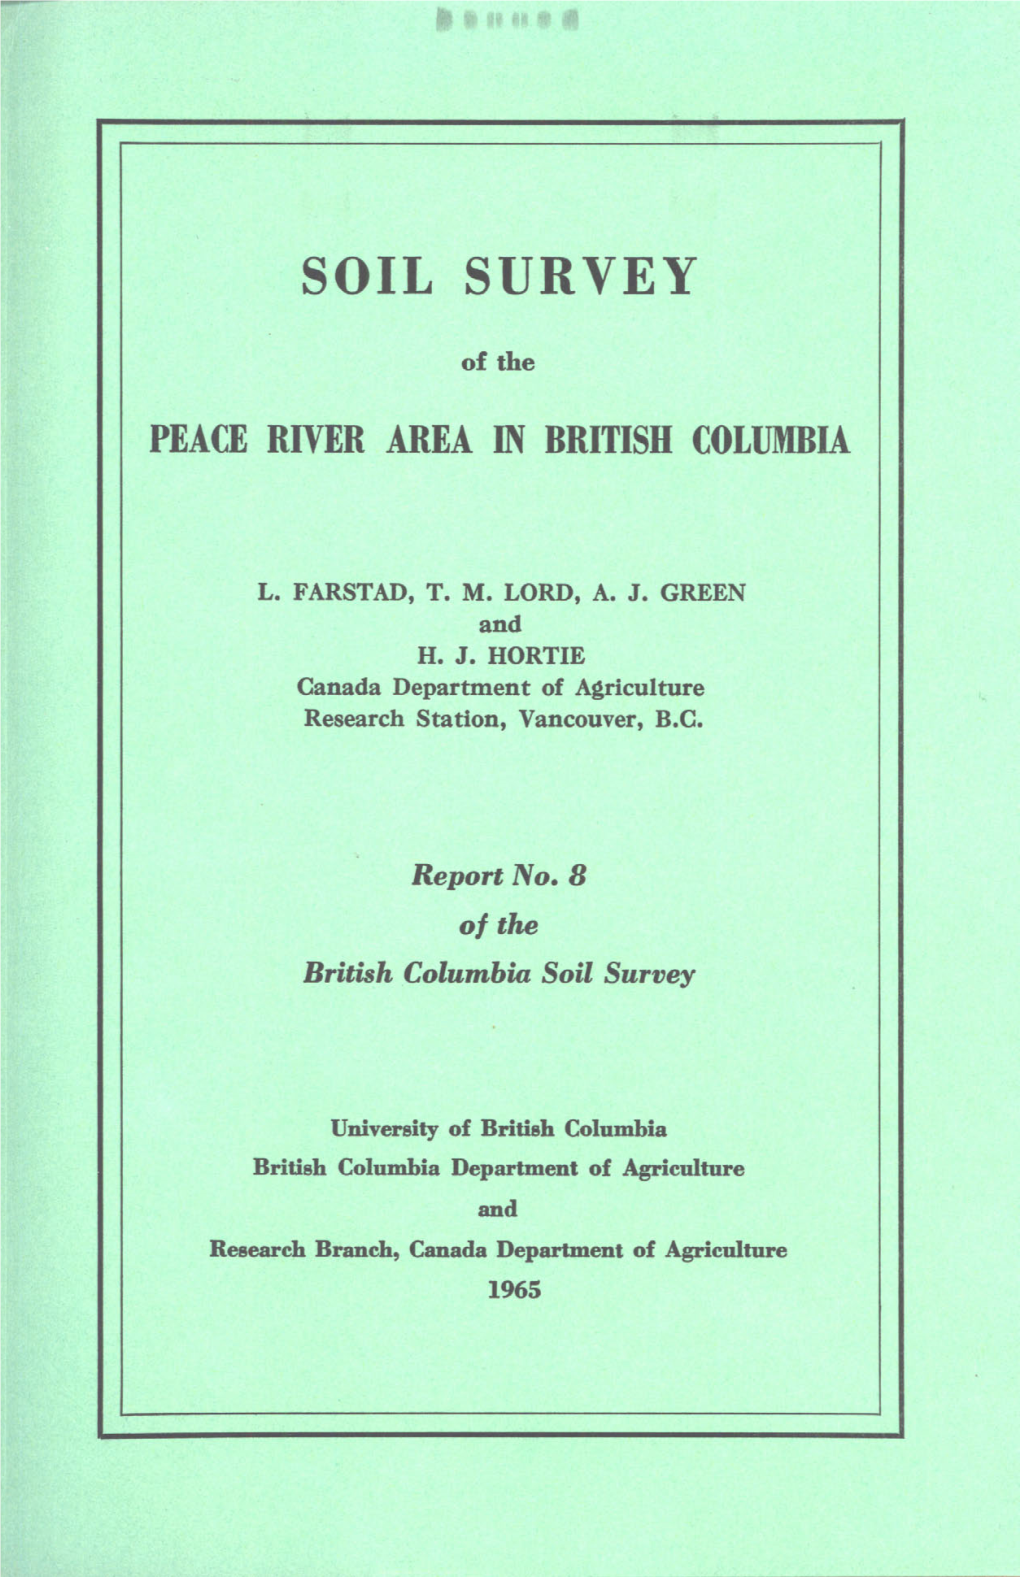 Peace River Area in British Columbia Was a Joint Project of the Canada and British Columbia Departmrnts of Agriculture and the University of British Columbia